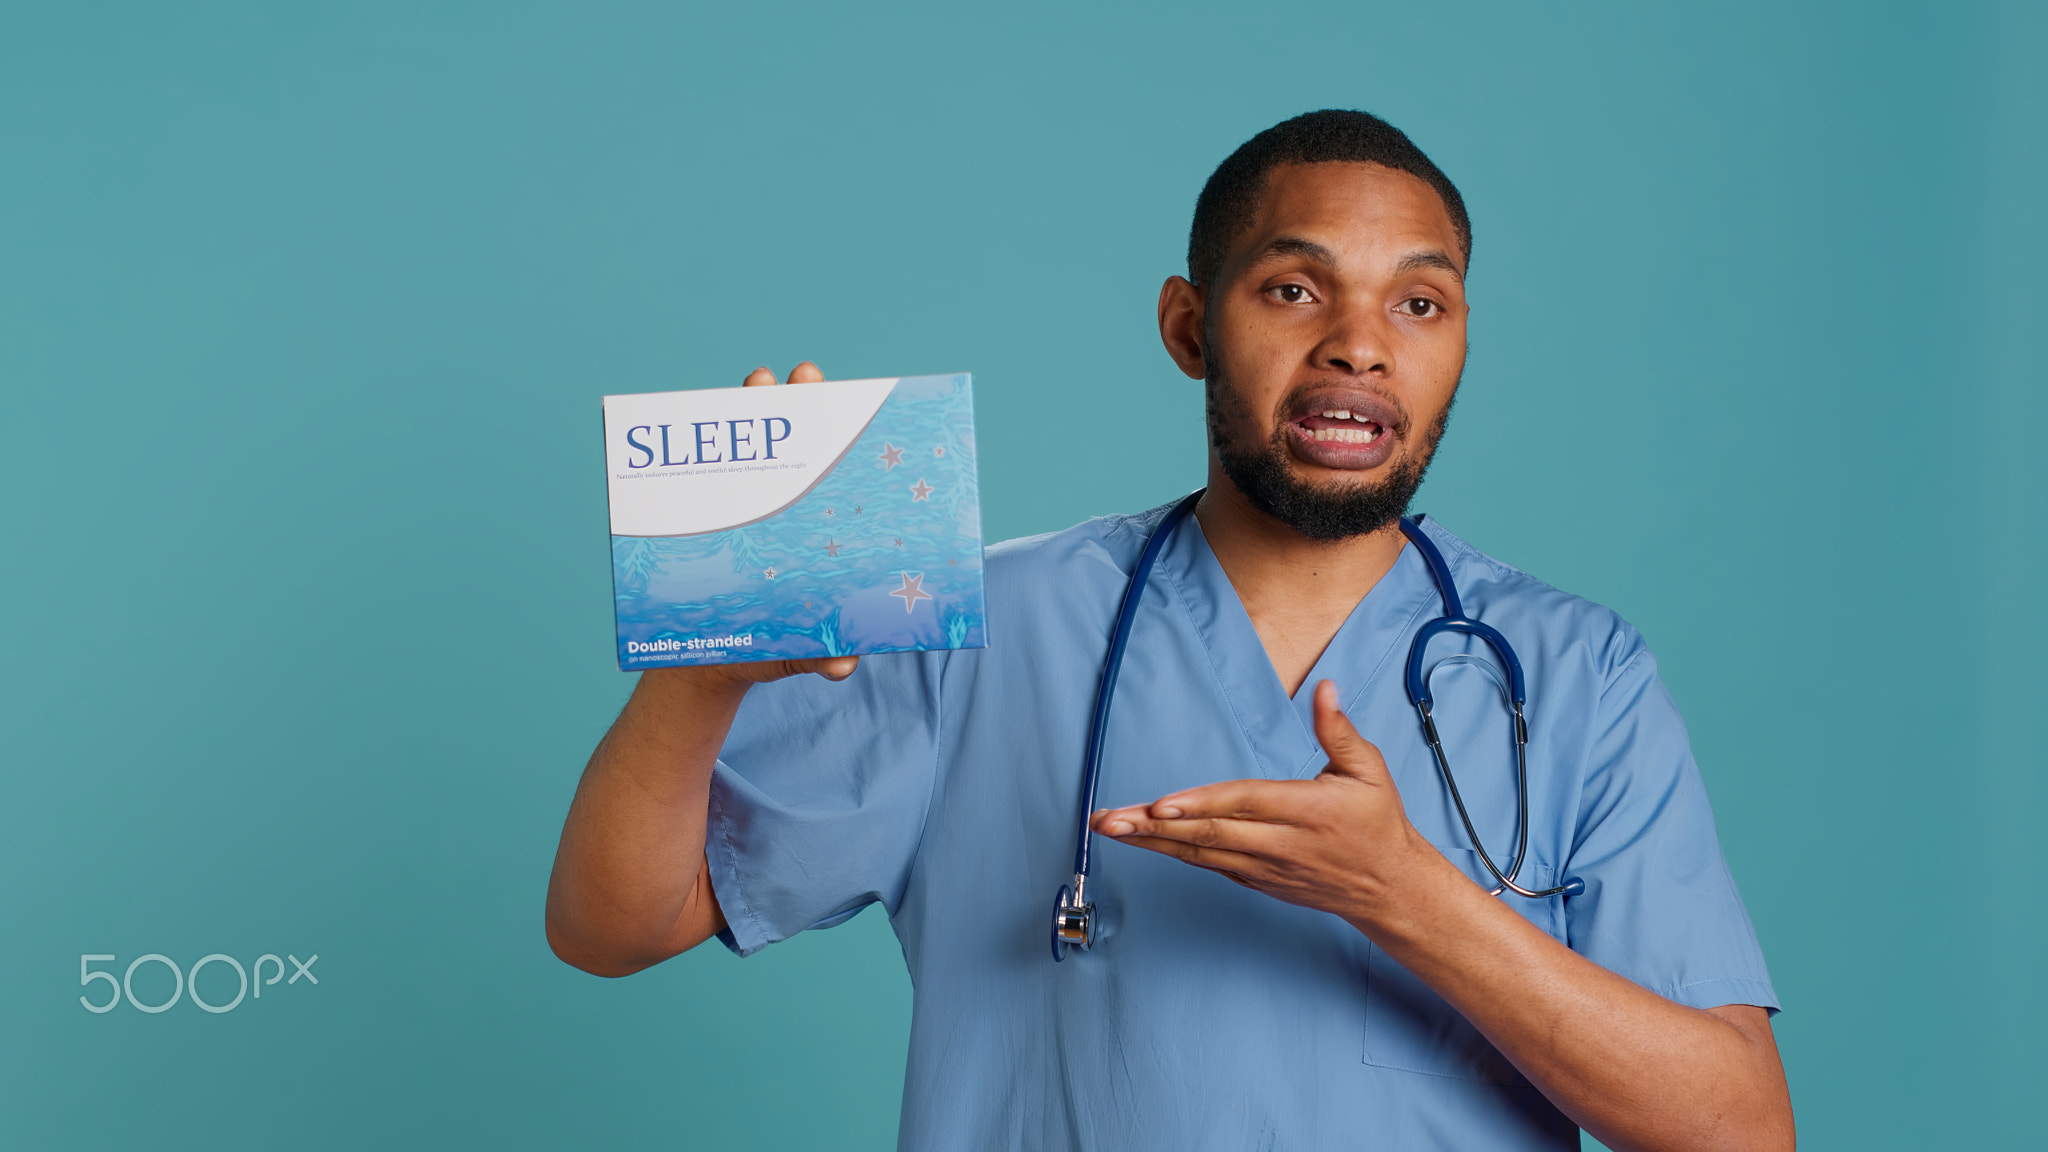 Healthcare specialist recommending tablets for patients with insomnia